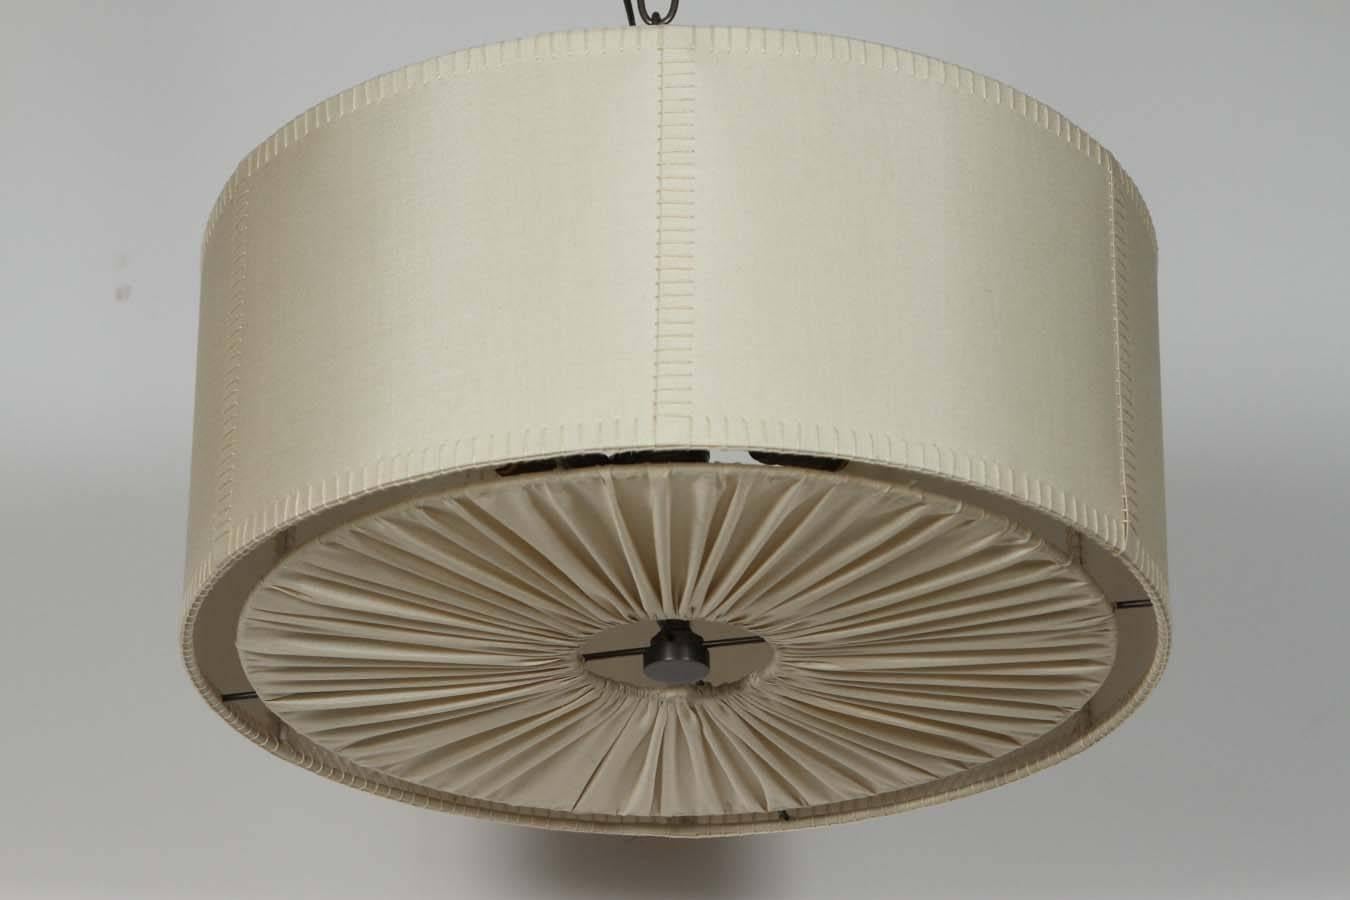 Hand-Woven Hand-Stitched Laced Linen Shaded Ceiling Mount Fixture